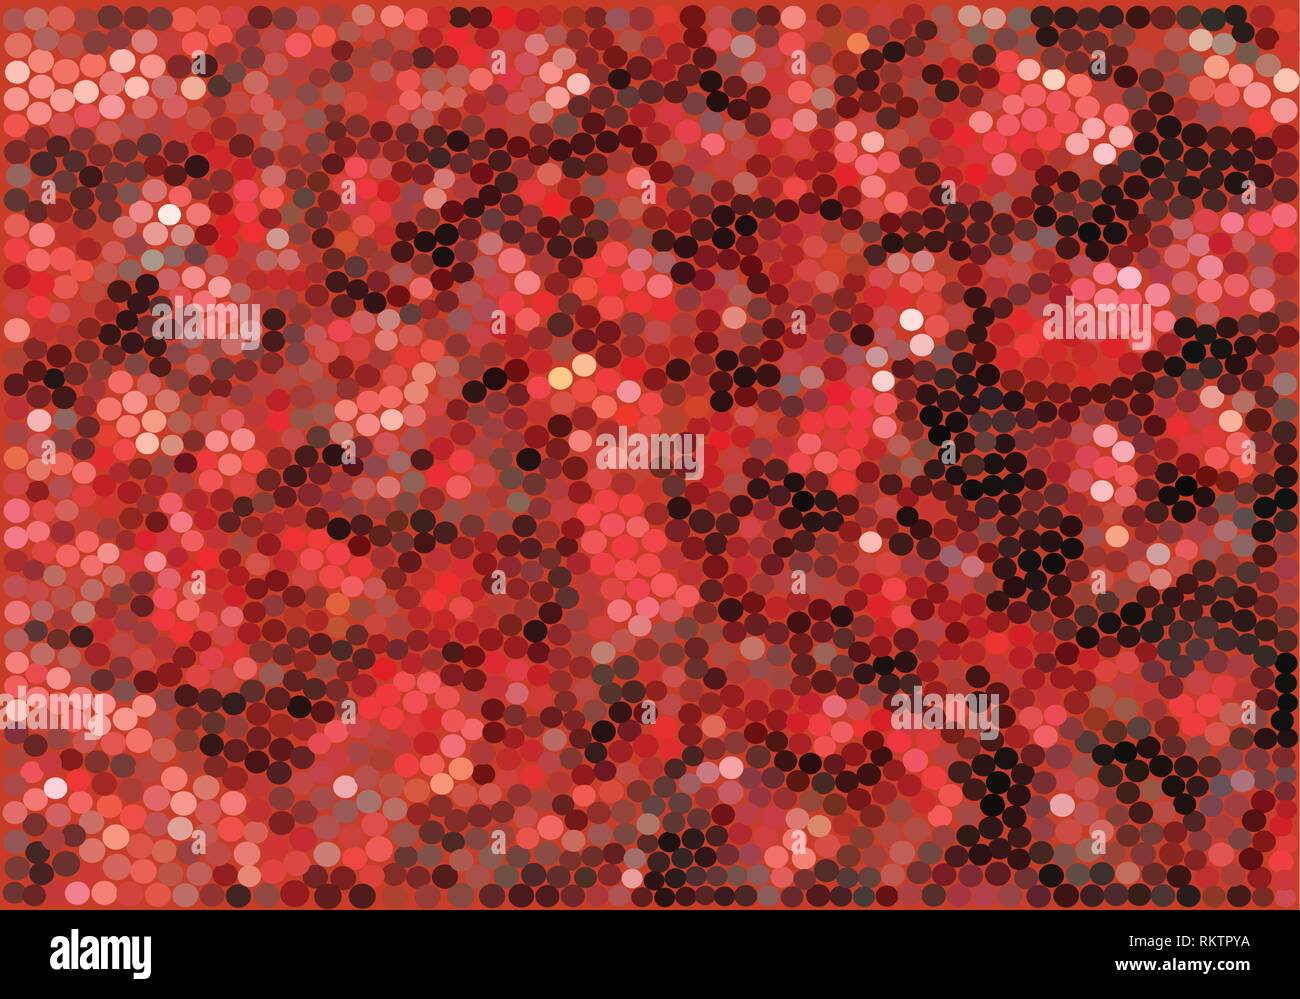 Red and black dots vector illustration Stock Vector